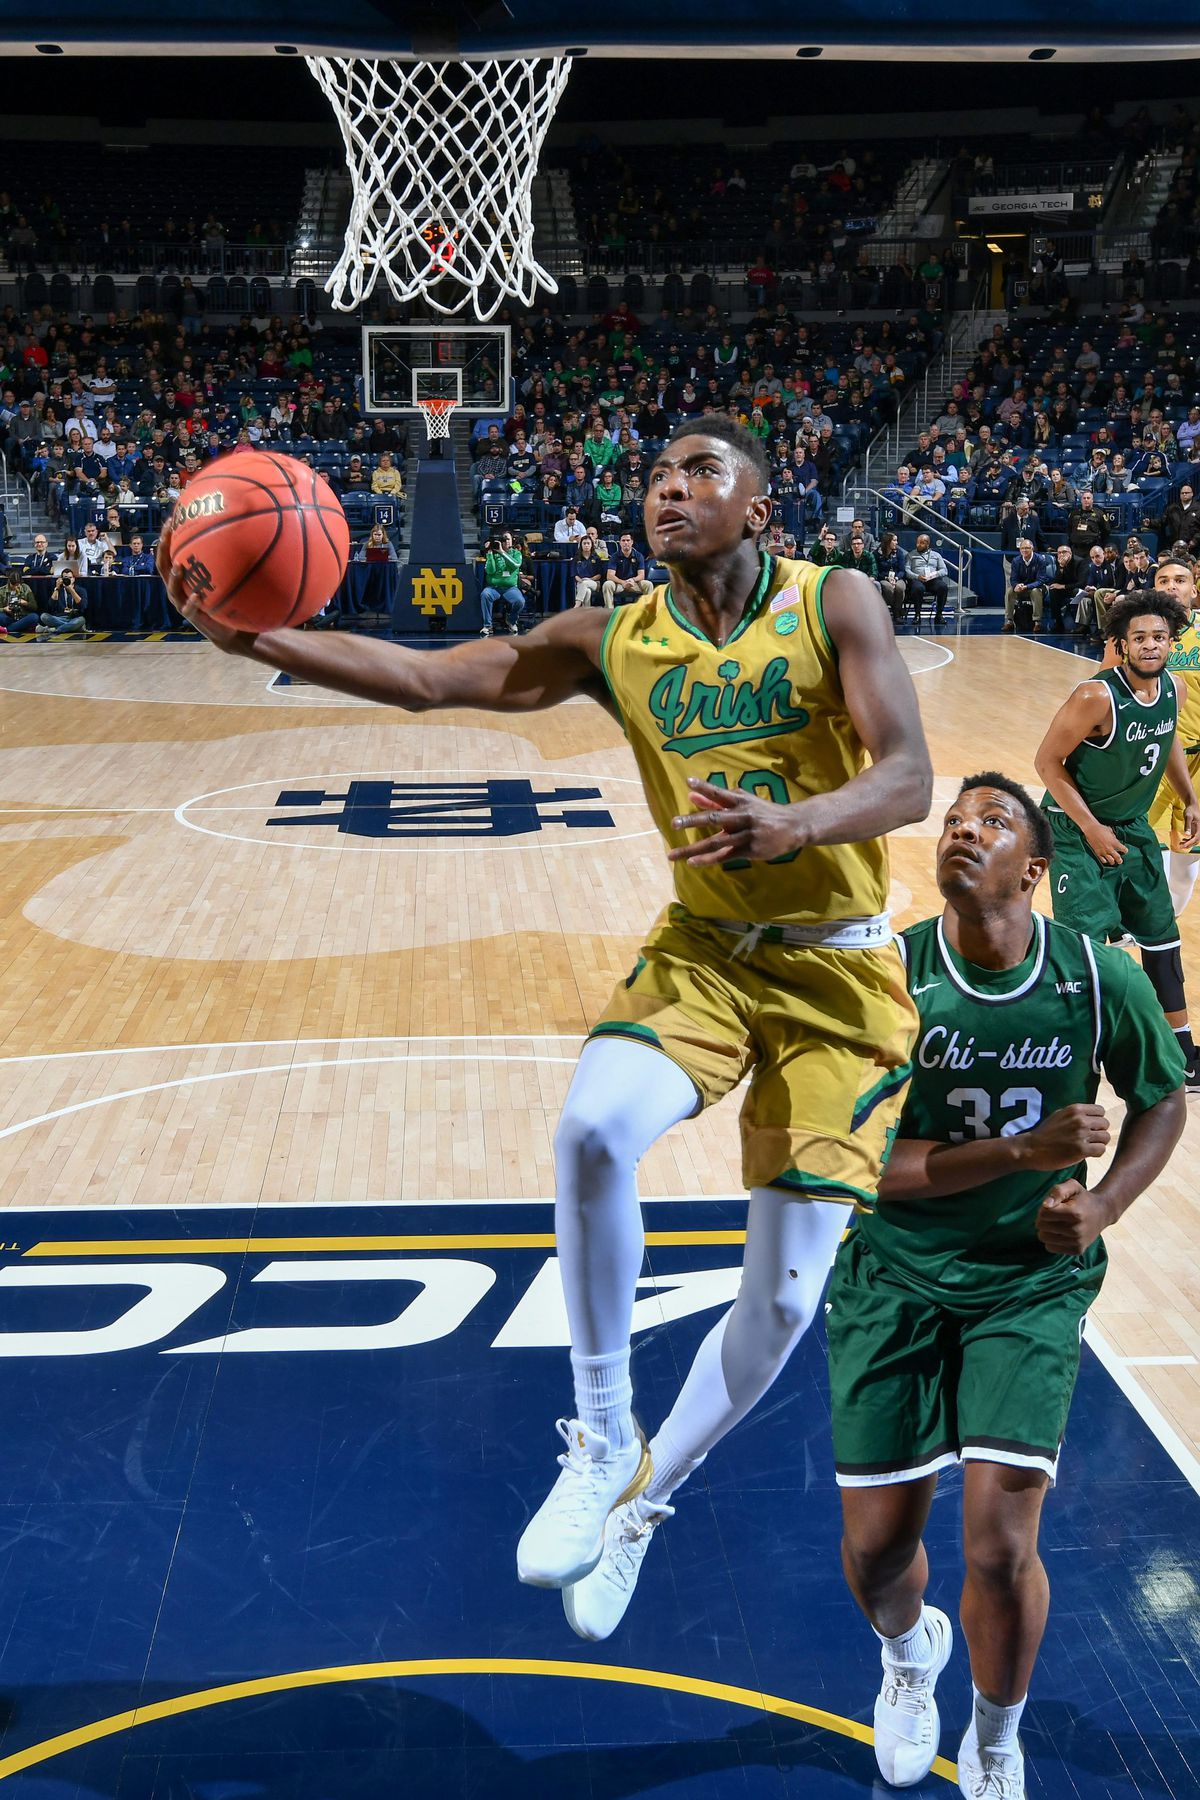 NCAA Basketball: Chicago State at Notre Dame